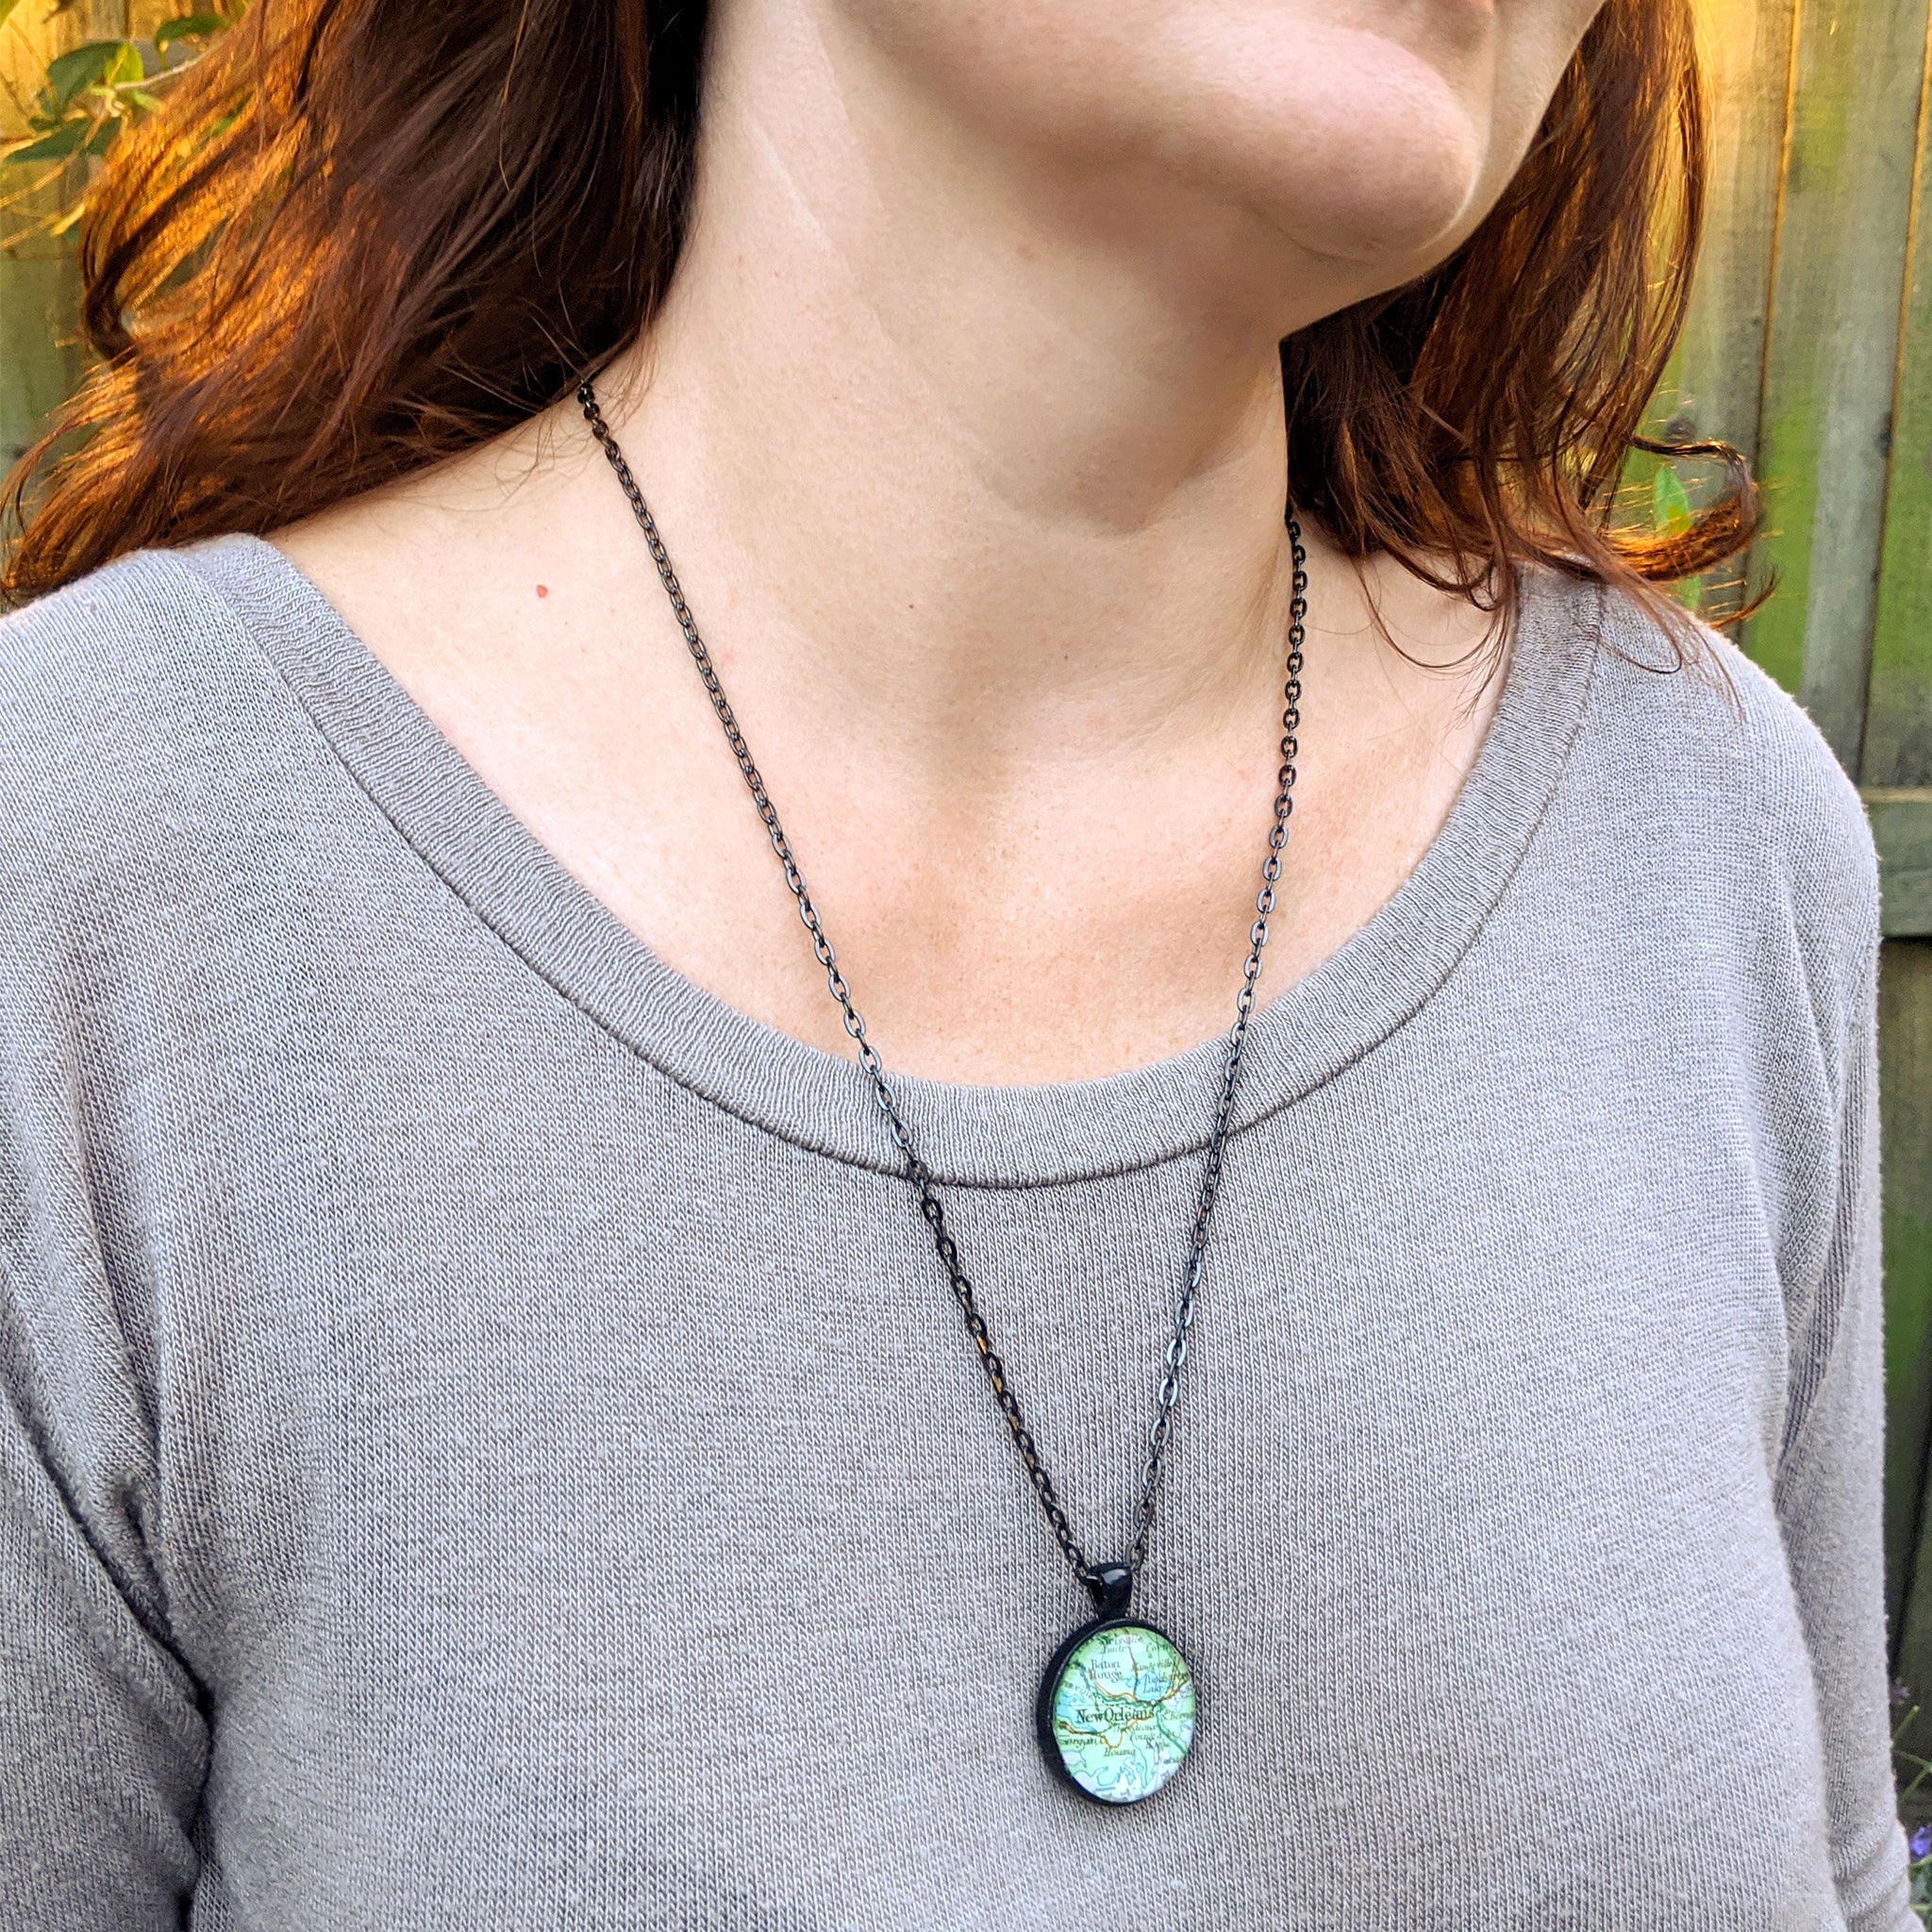 Two sided map necklace in black color worn by a woman